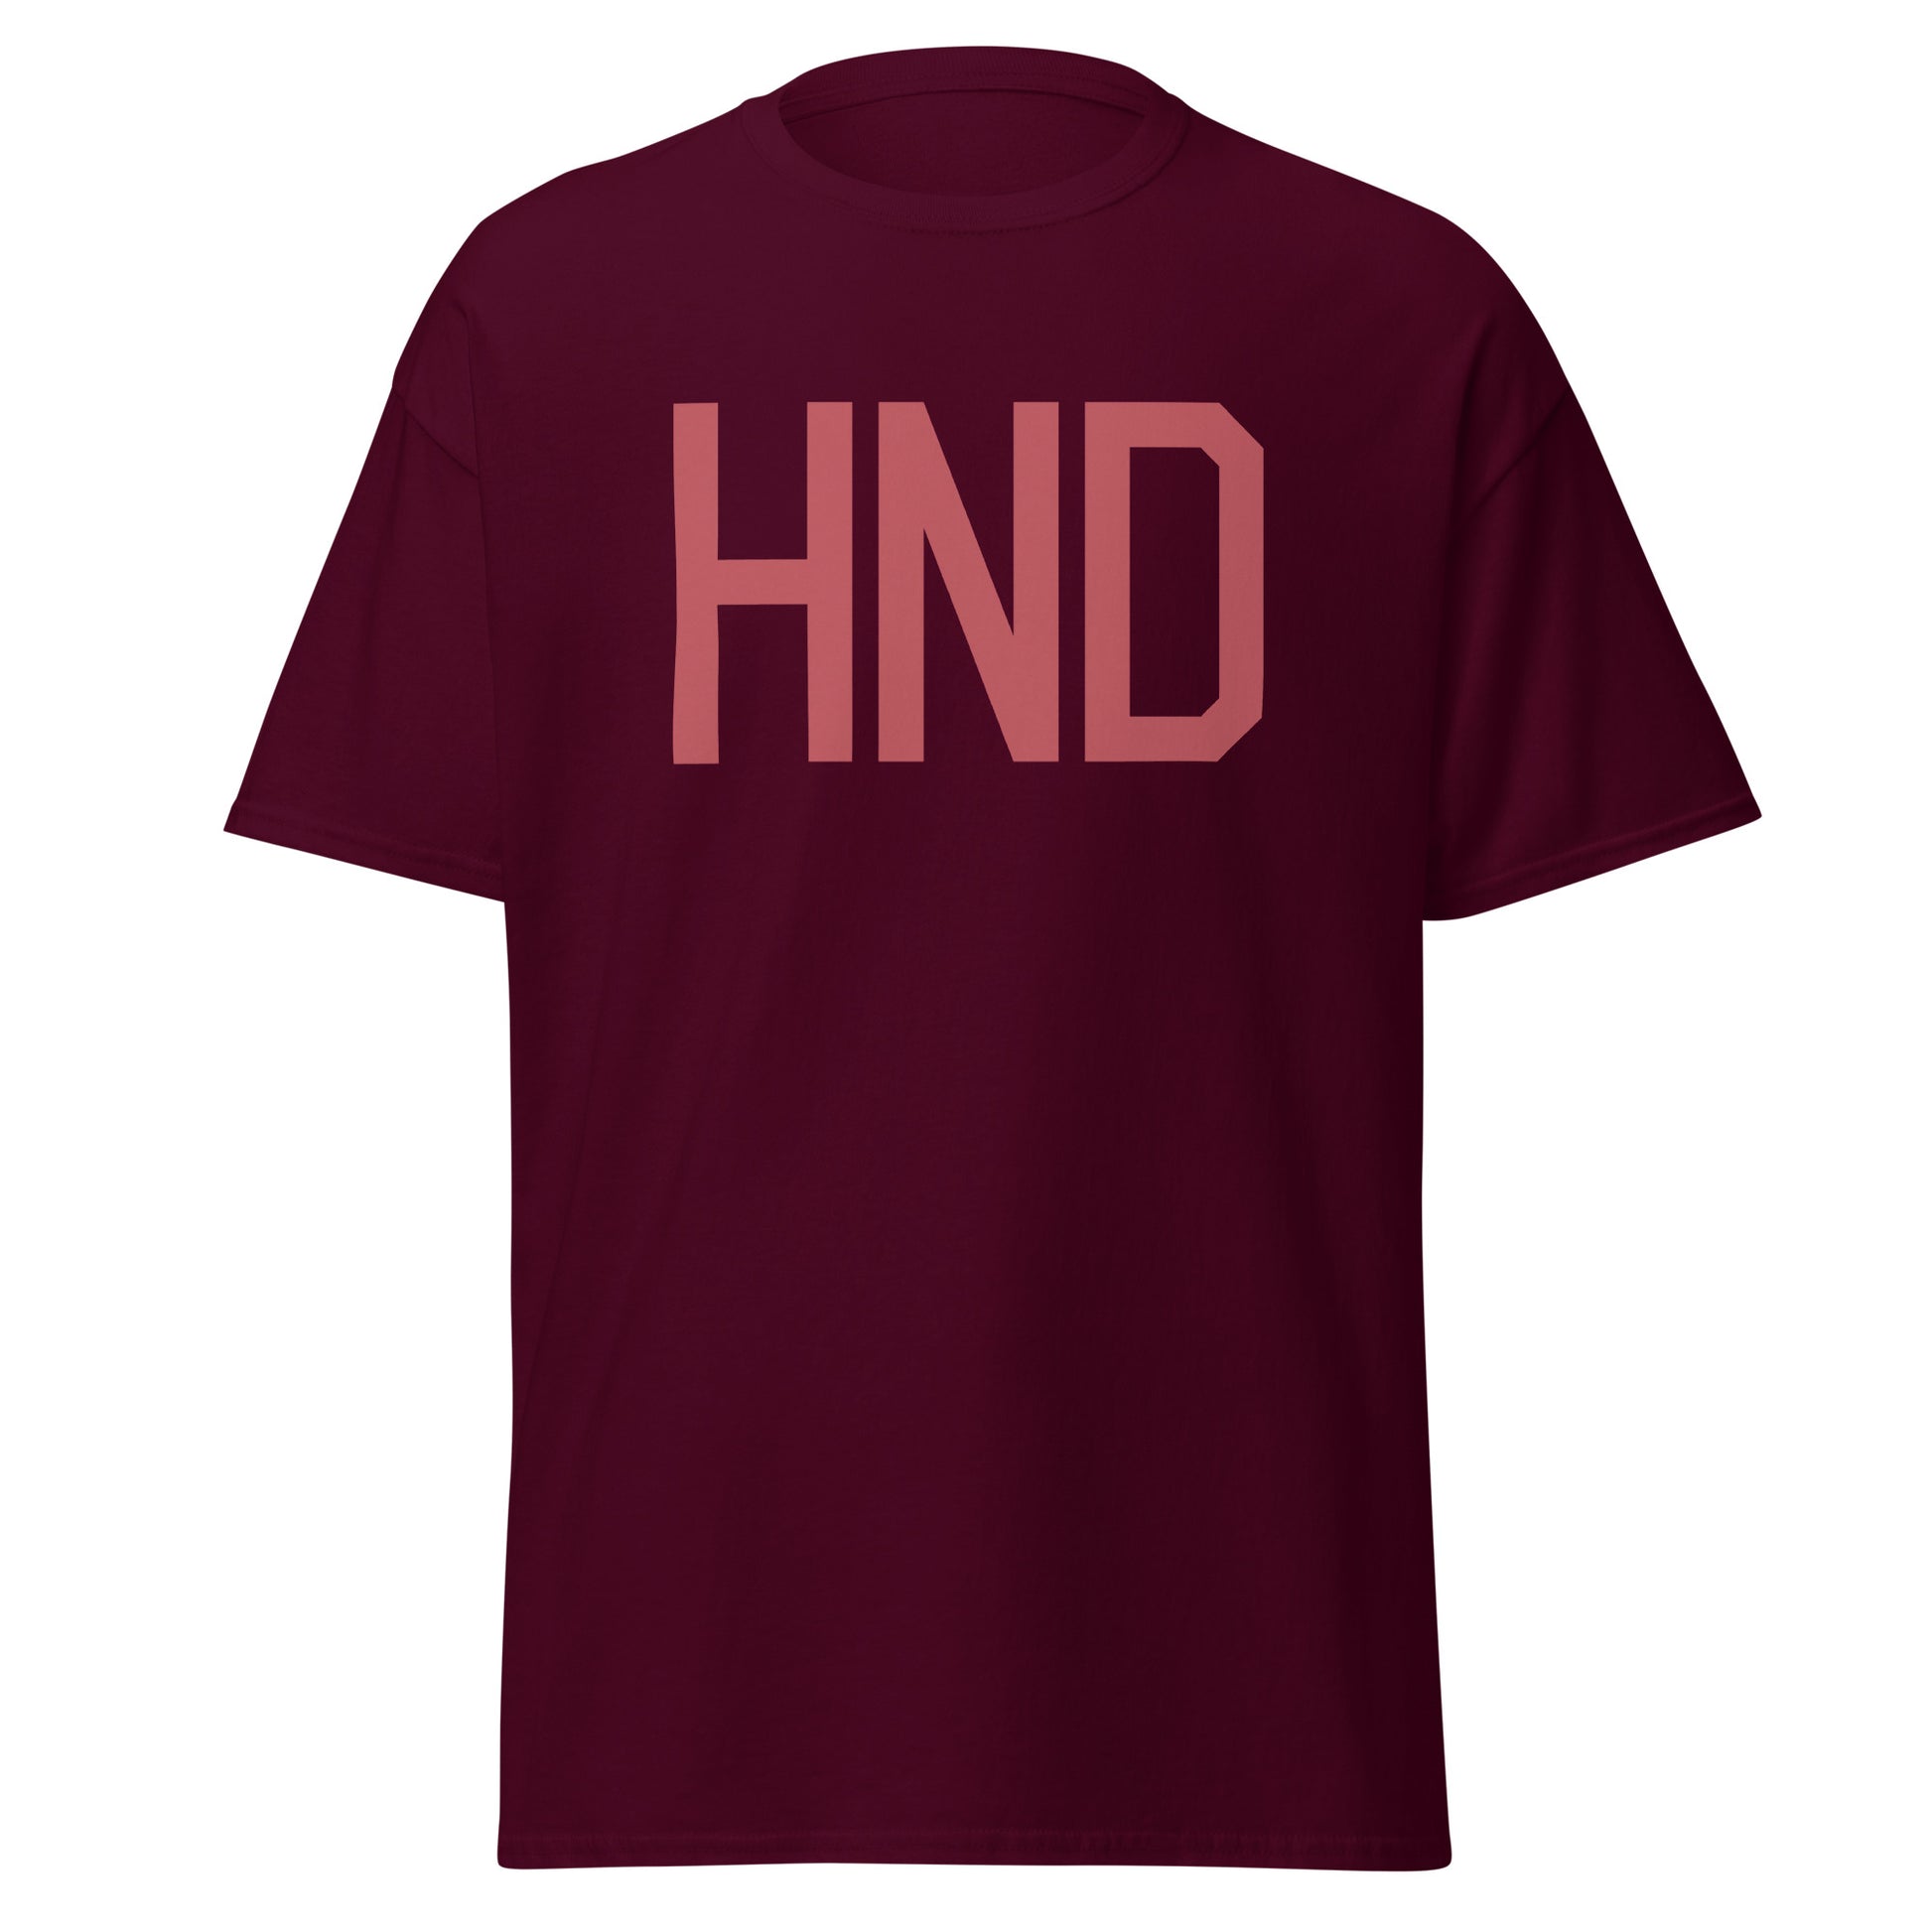 Aviation Enthusiast Men's Tee - Deep Pink Graphic • HND Tokyo • YHM Designs - Image 05